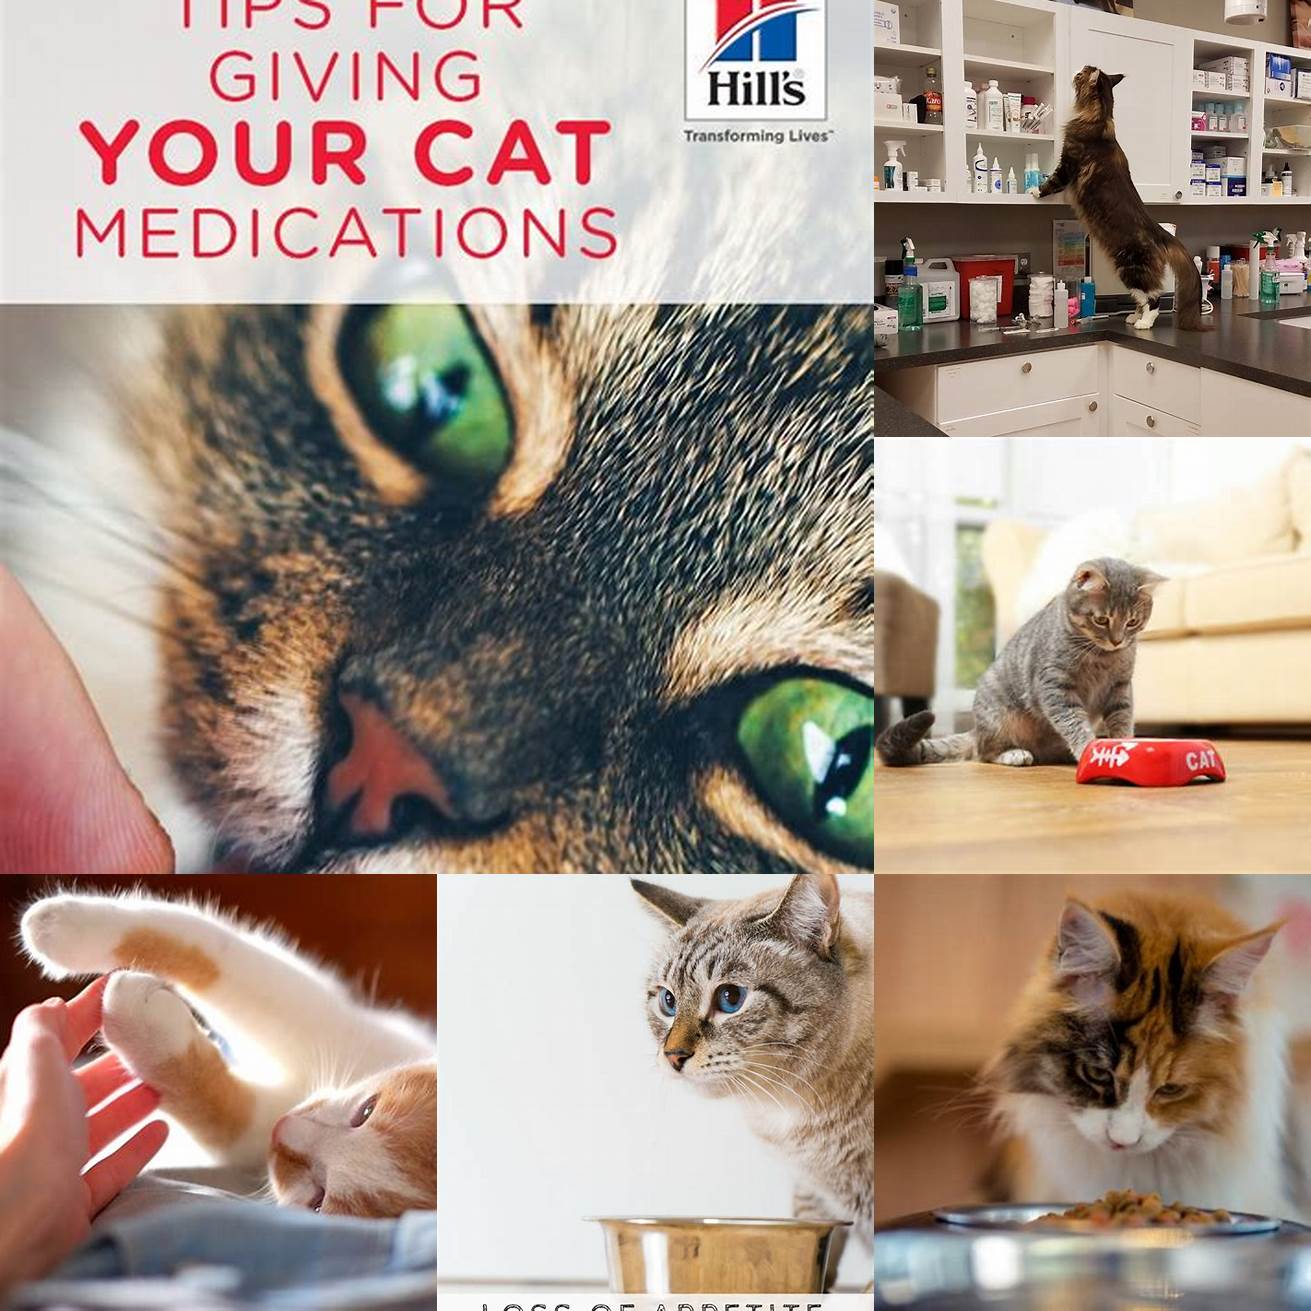 Q Can medication cause a cat to lose their appetite